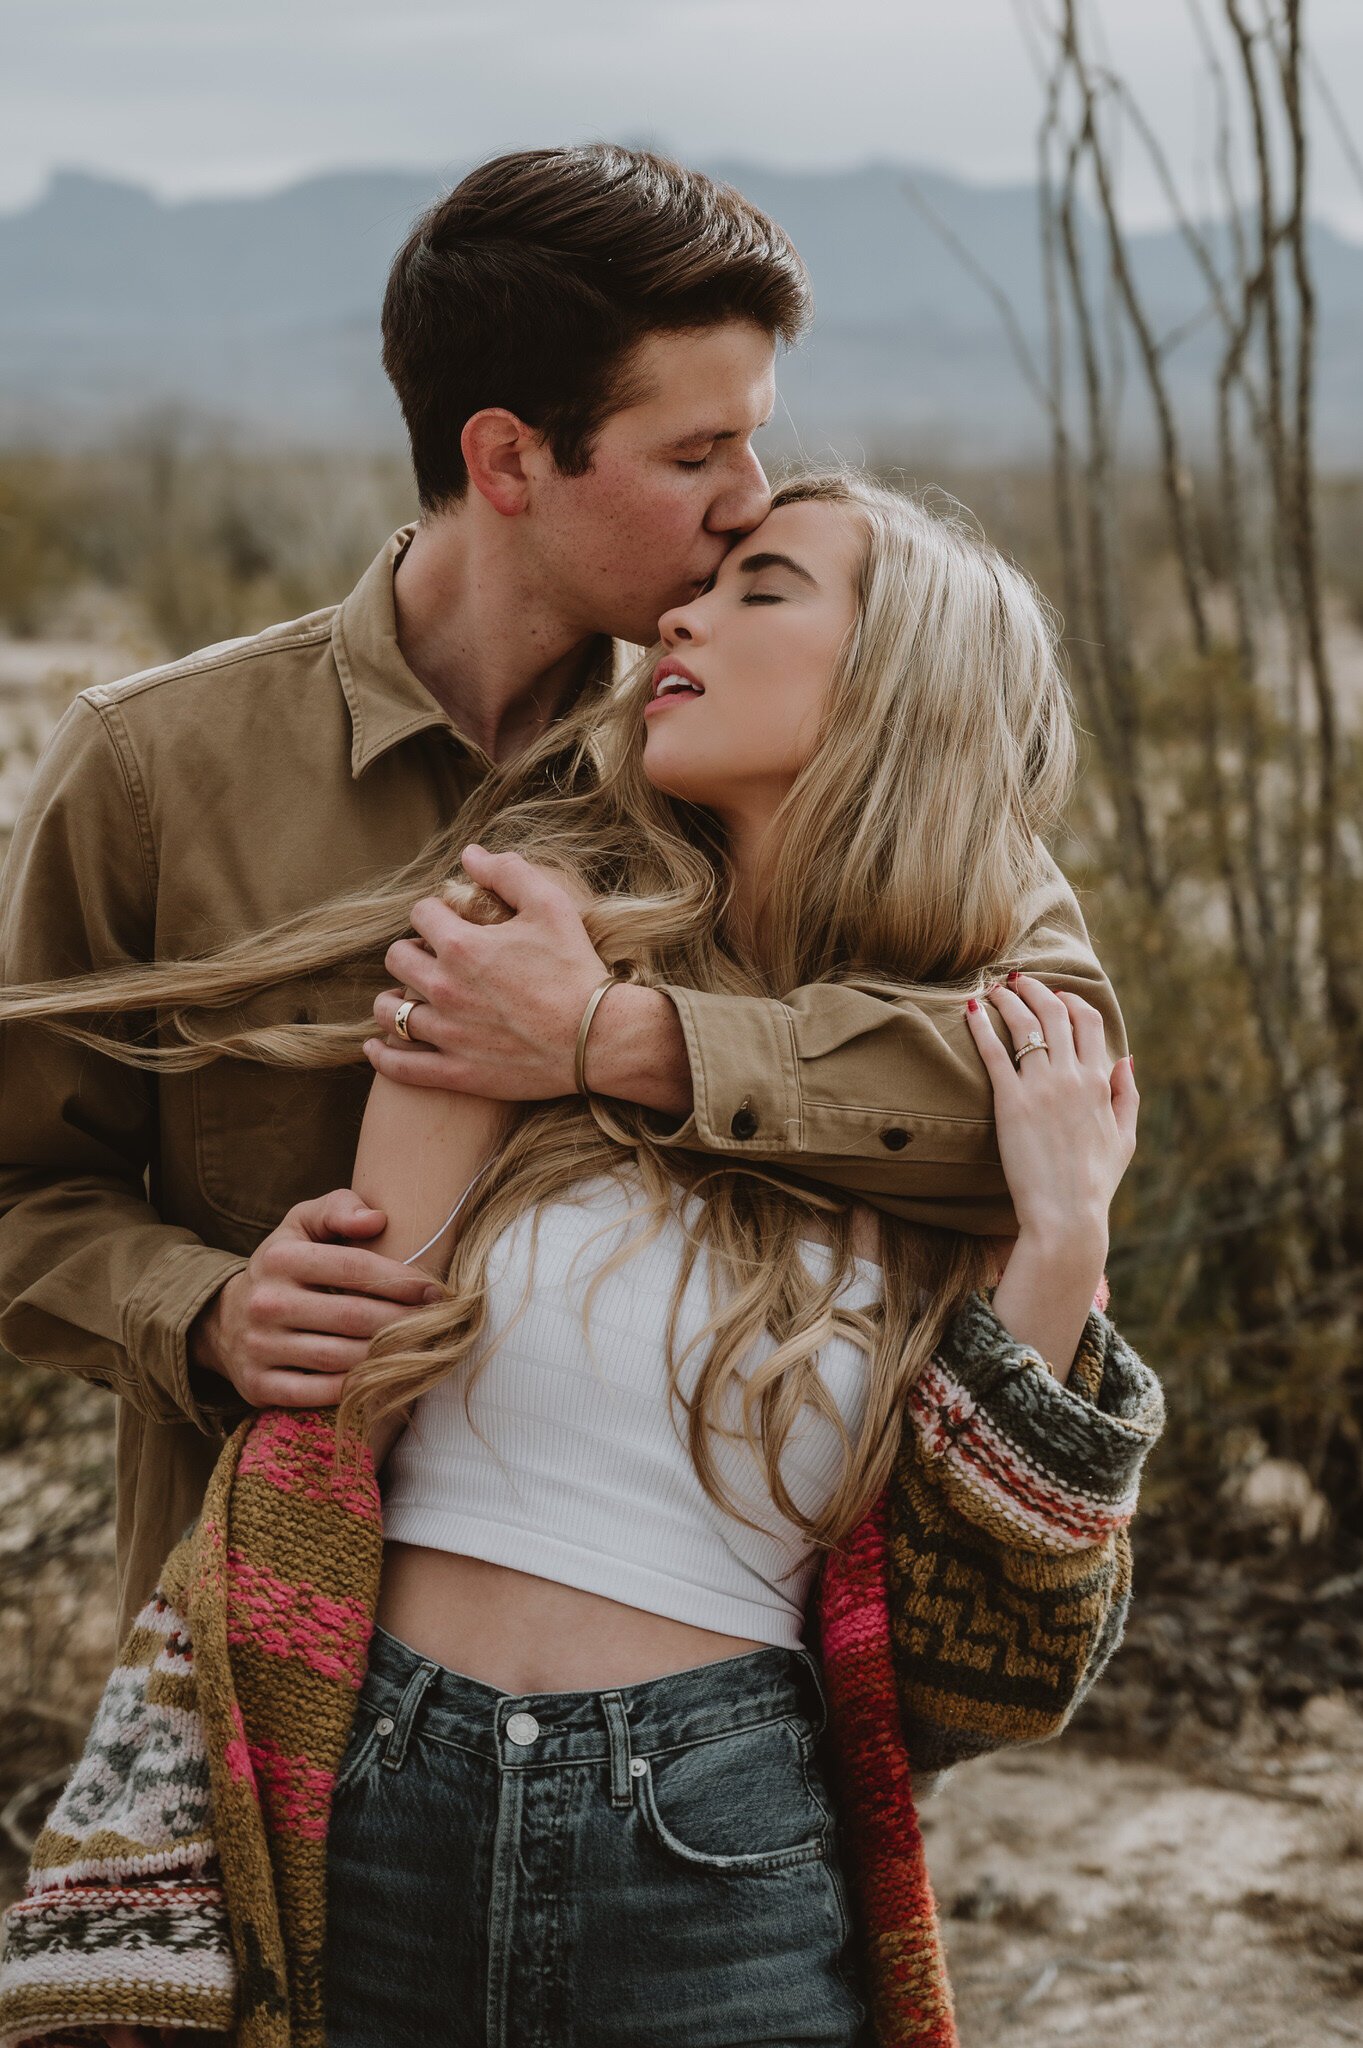 Kaylie-Sirek-Photography-Big-Bend-National-Park-Texas-Engagement-Session-Styled-You-006.jpg